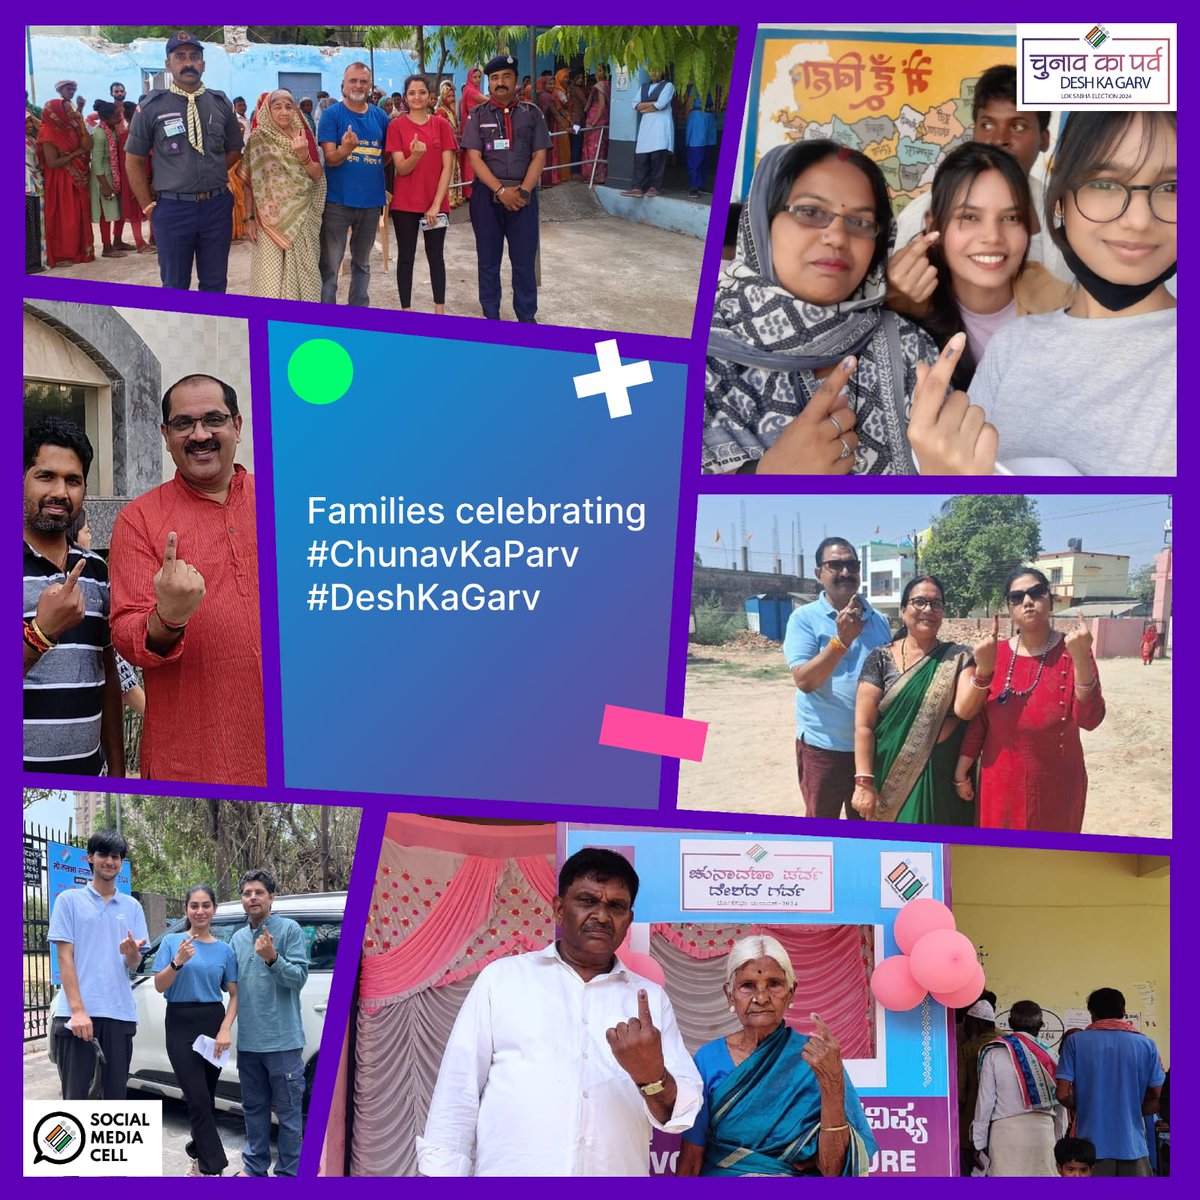 #SaathChalenge: Family members visiting polling stations together to cast their individual votes. #MyVoteMyChoice #YouAreTheOne #DeshKaGarv #Elections2024 #IVote4Sure #GeneralElection2024